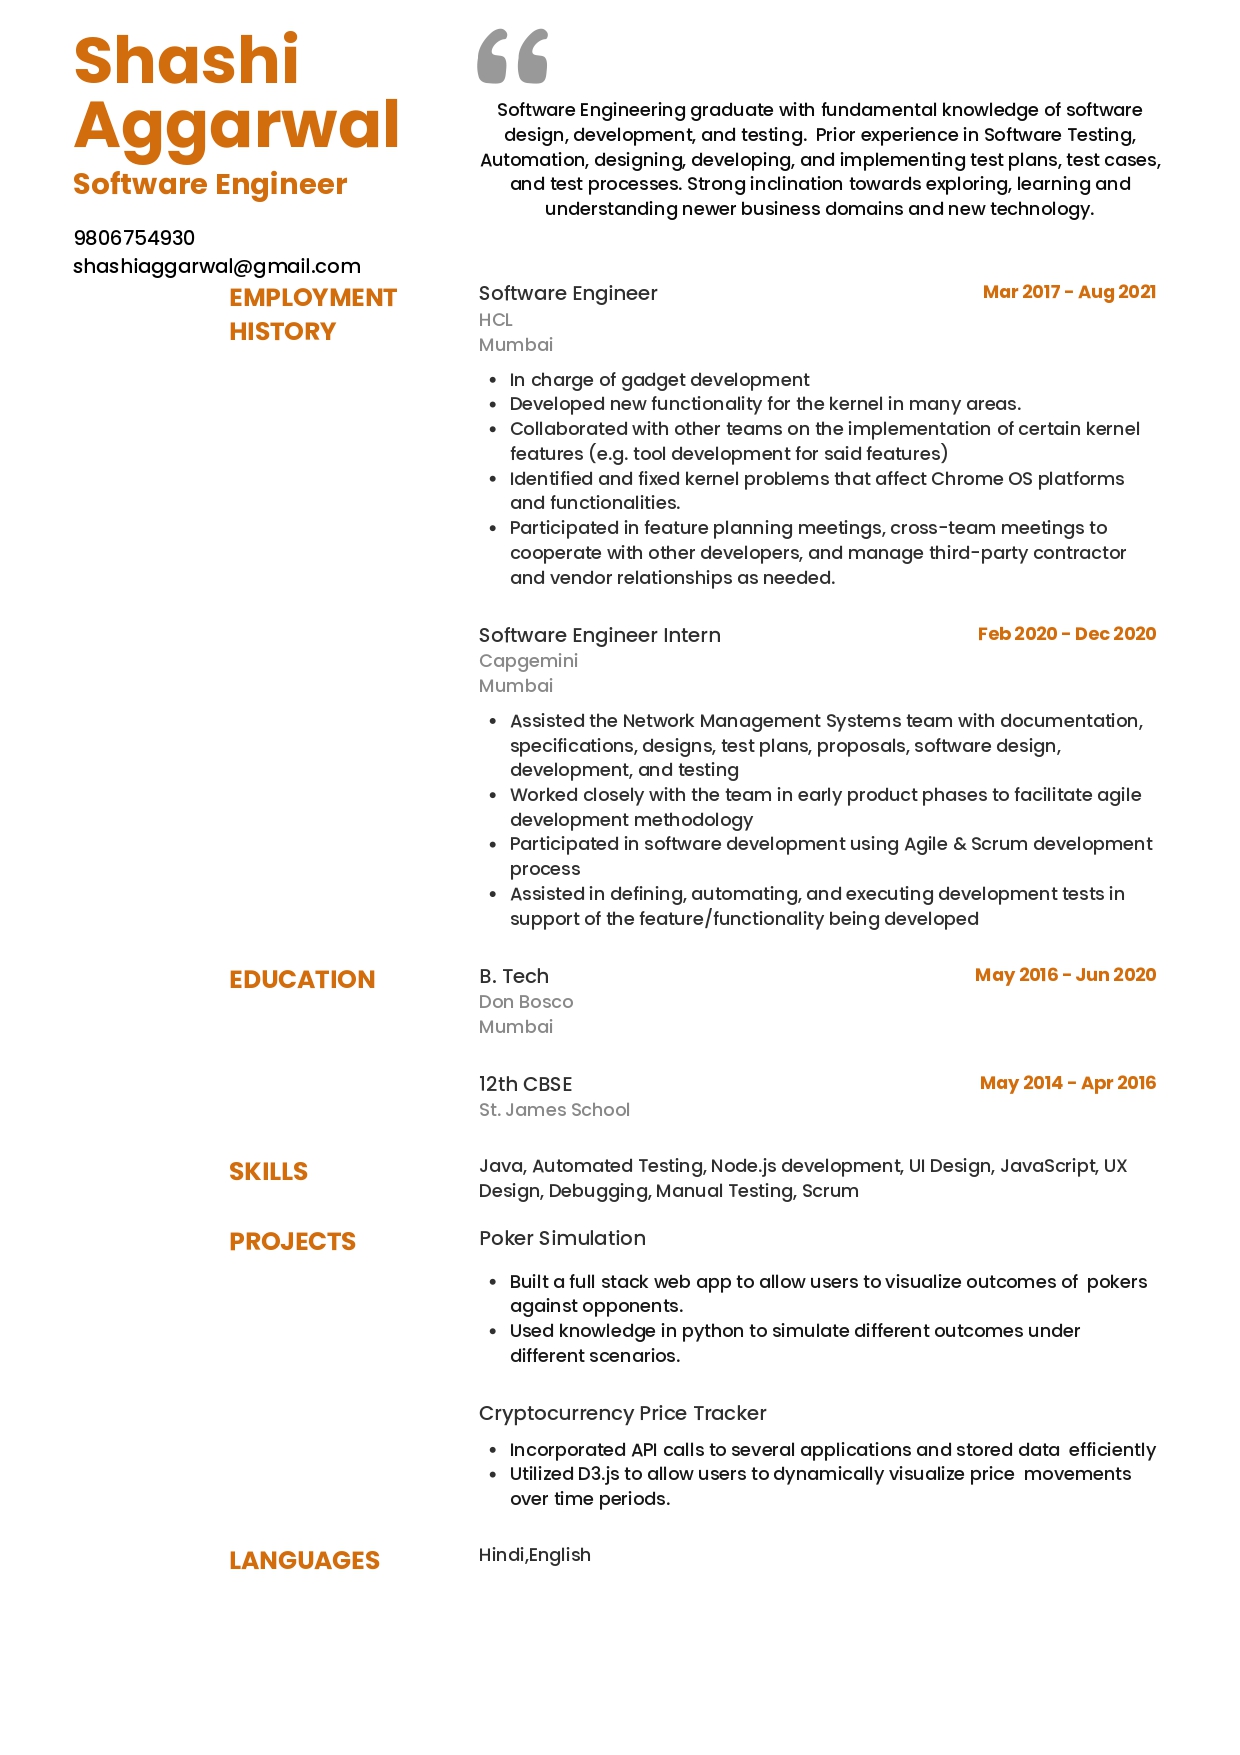 Sample Resume of Software Engineer | Free Resume Templates & Samples on Resumod.co